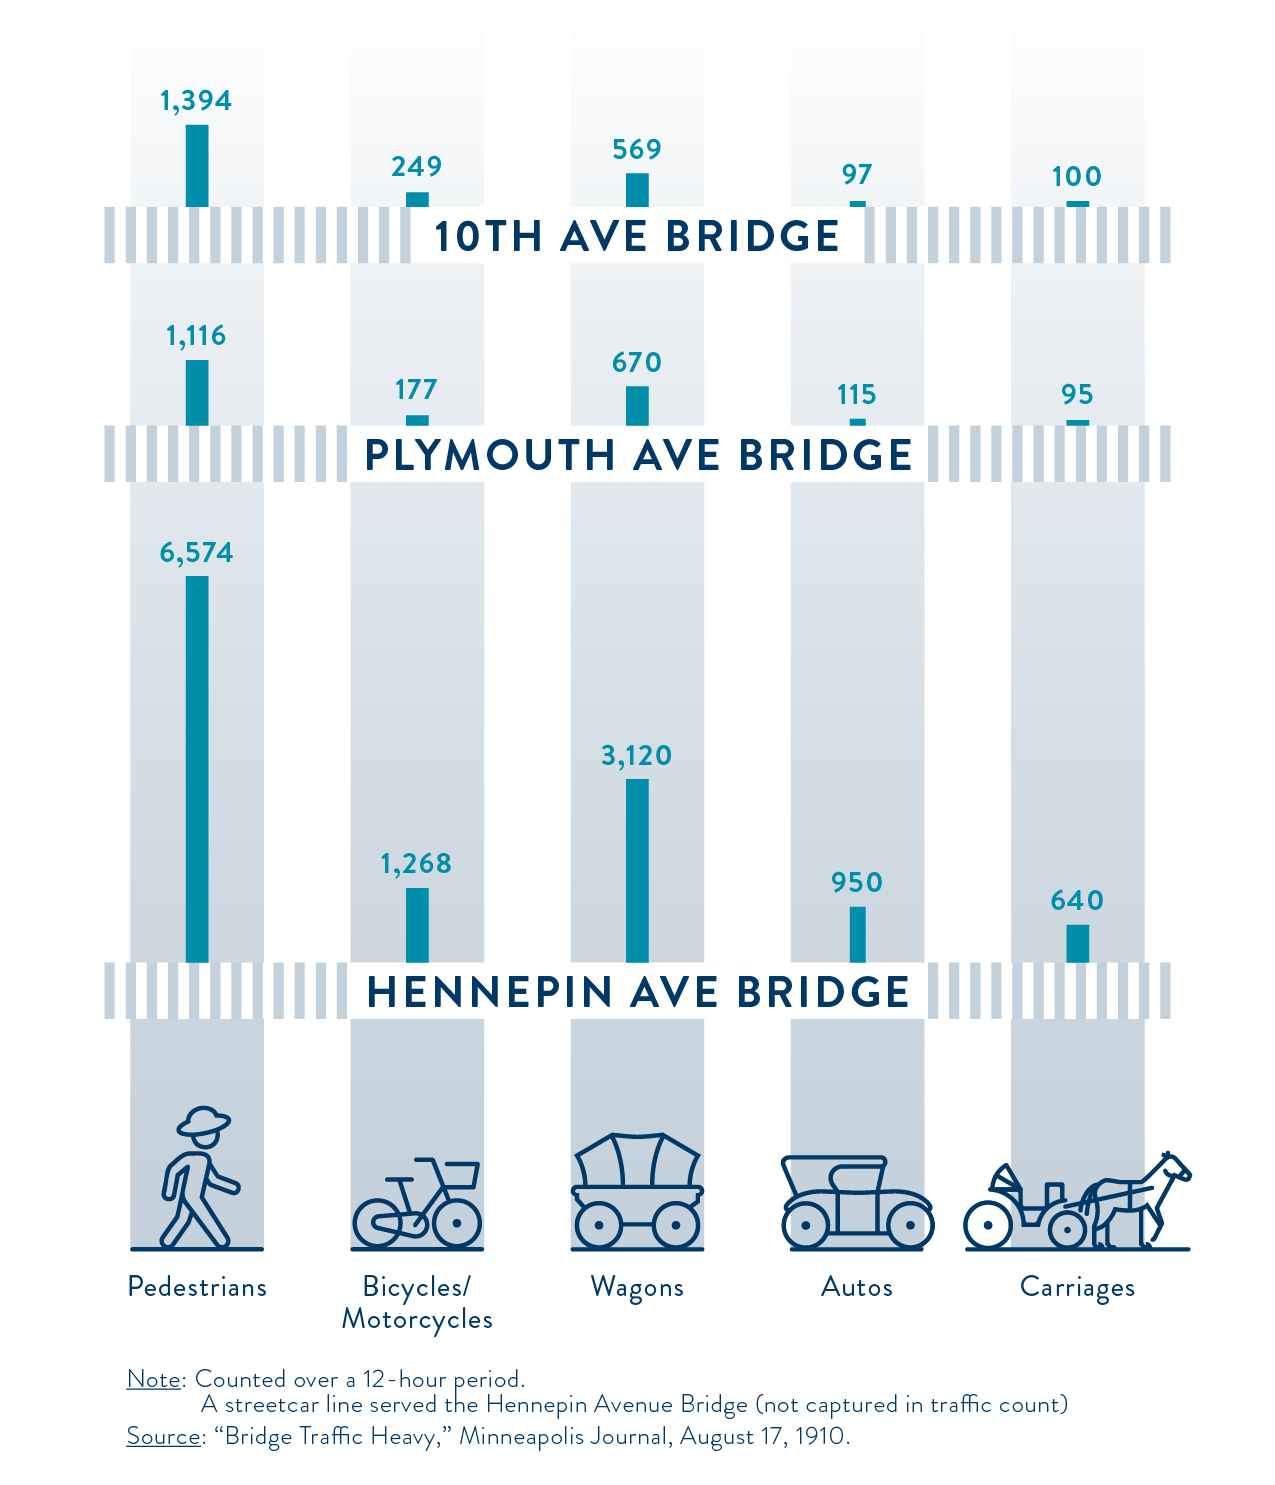 A graphic showing bridge usage in 1910 by pedestrians, bicycles/motorcyclists, wagons, autos, and carriages across the Old 10th Avenue Bridge, the Plymouth Avenue Bridge, and the Hennepin Avenue Bridge.